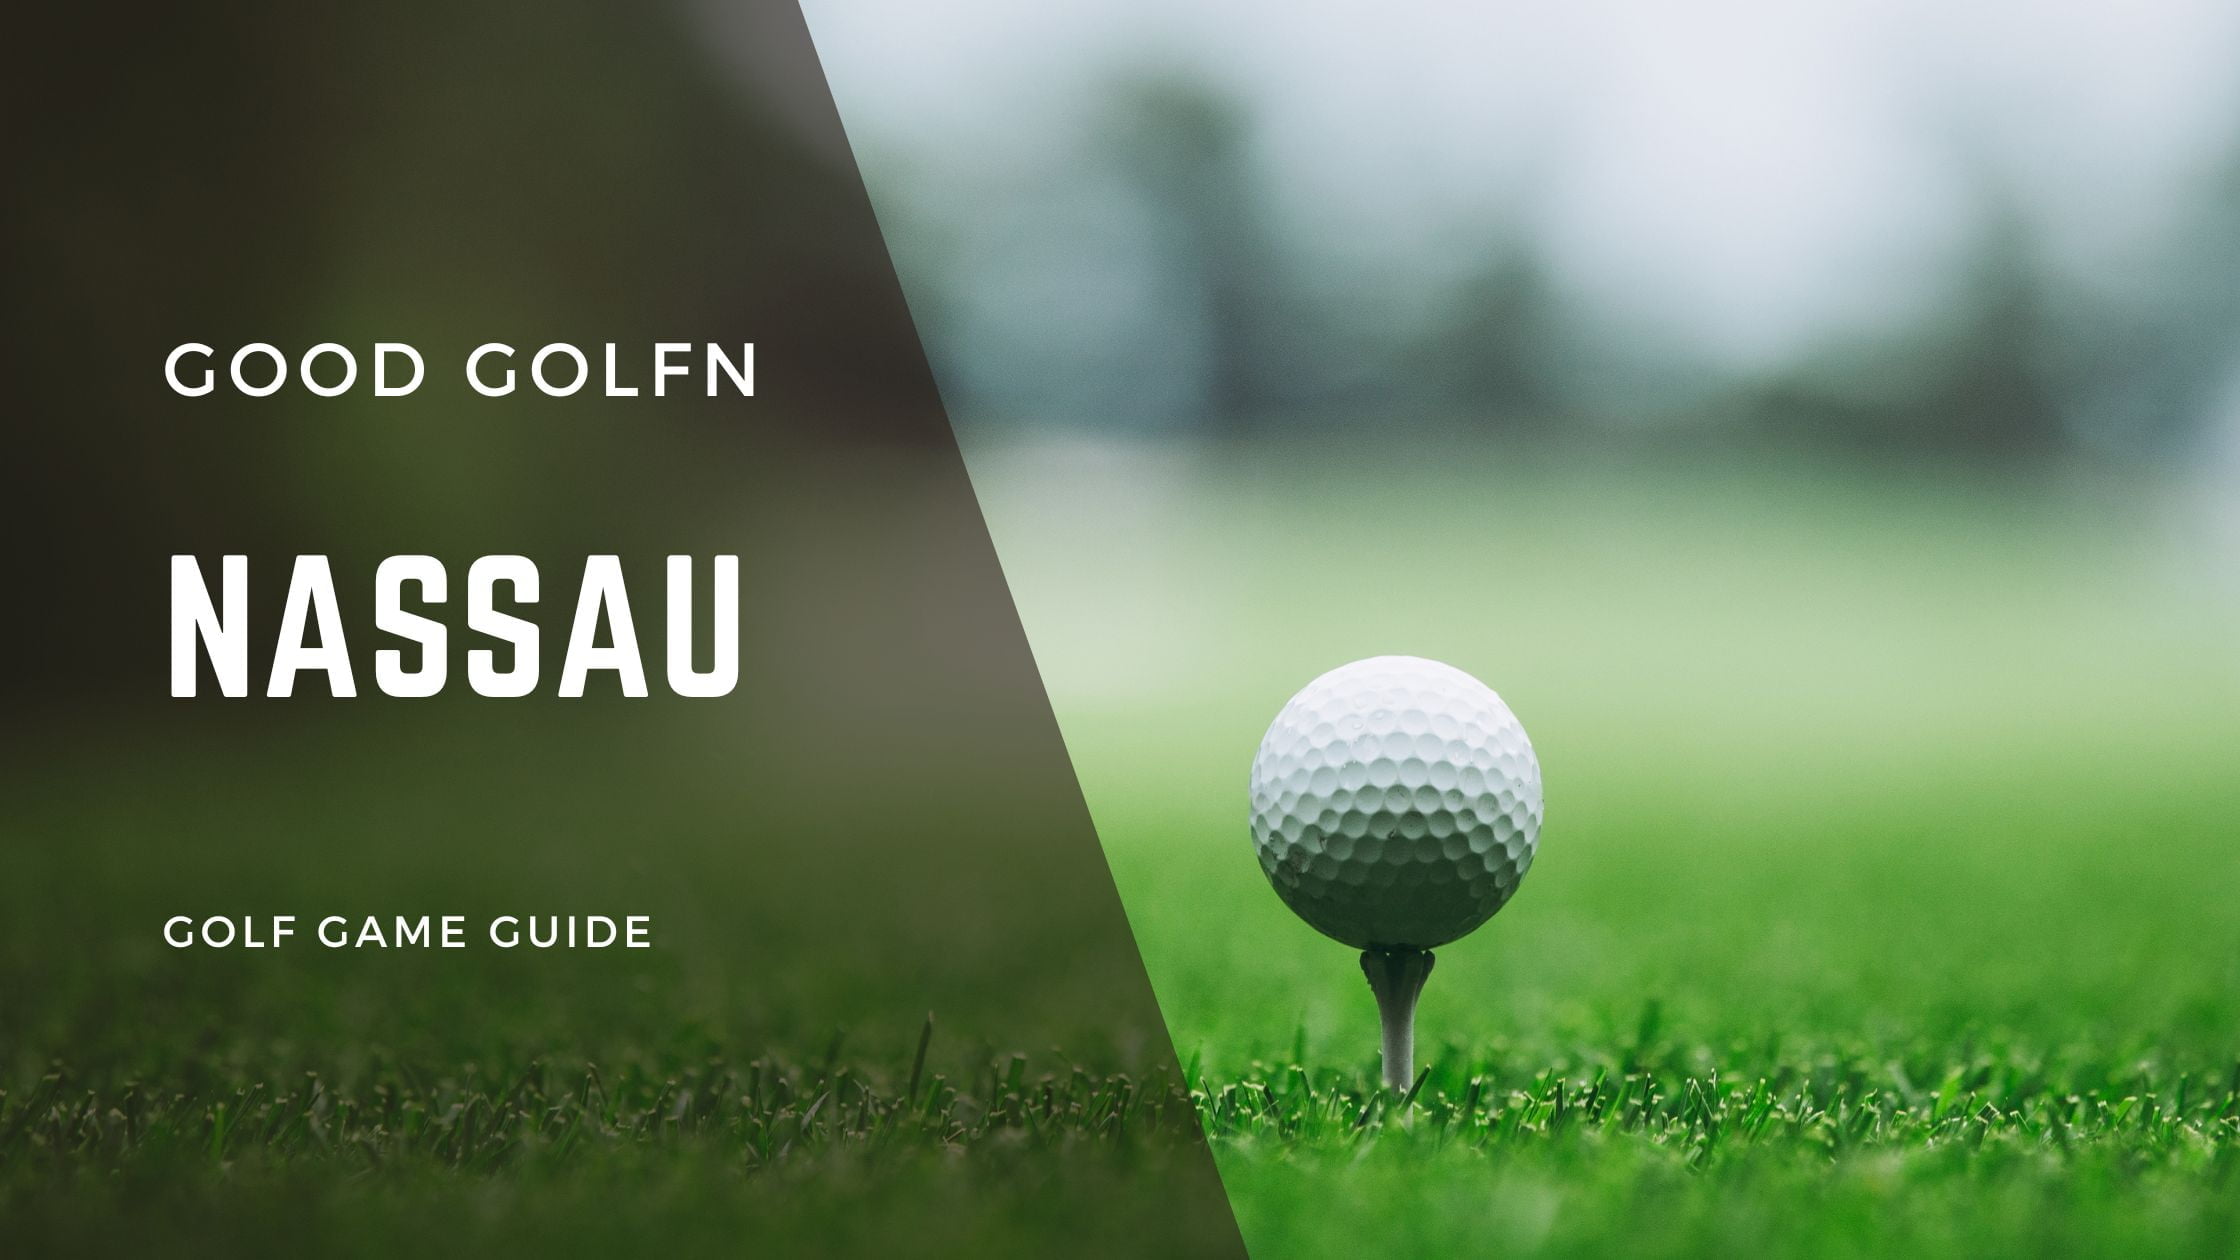 Dive into the intriguing world of Nassau golf! Discover its origins, learn the rules, and master the strategies to ace this exciting betting game.